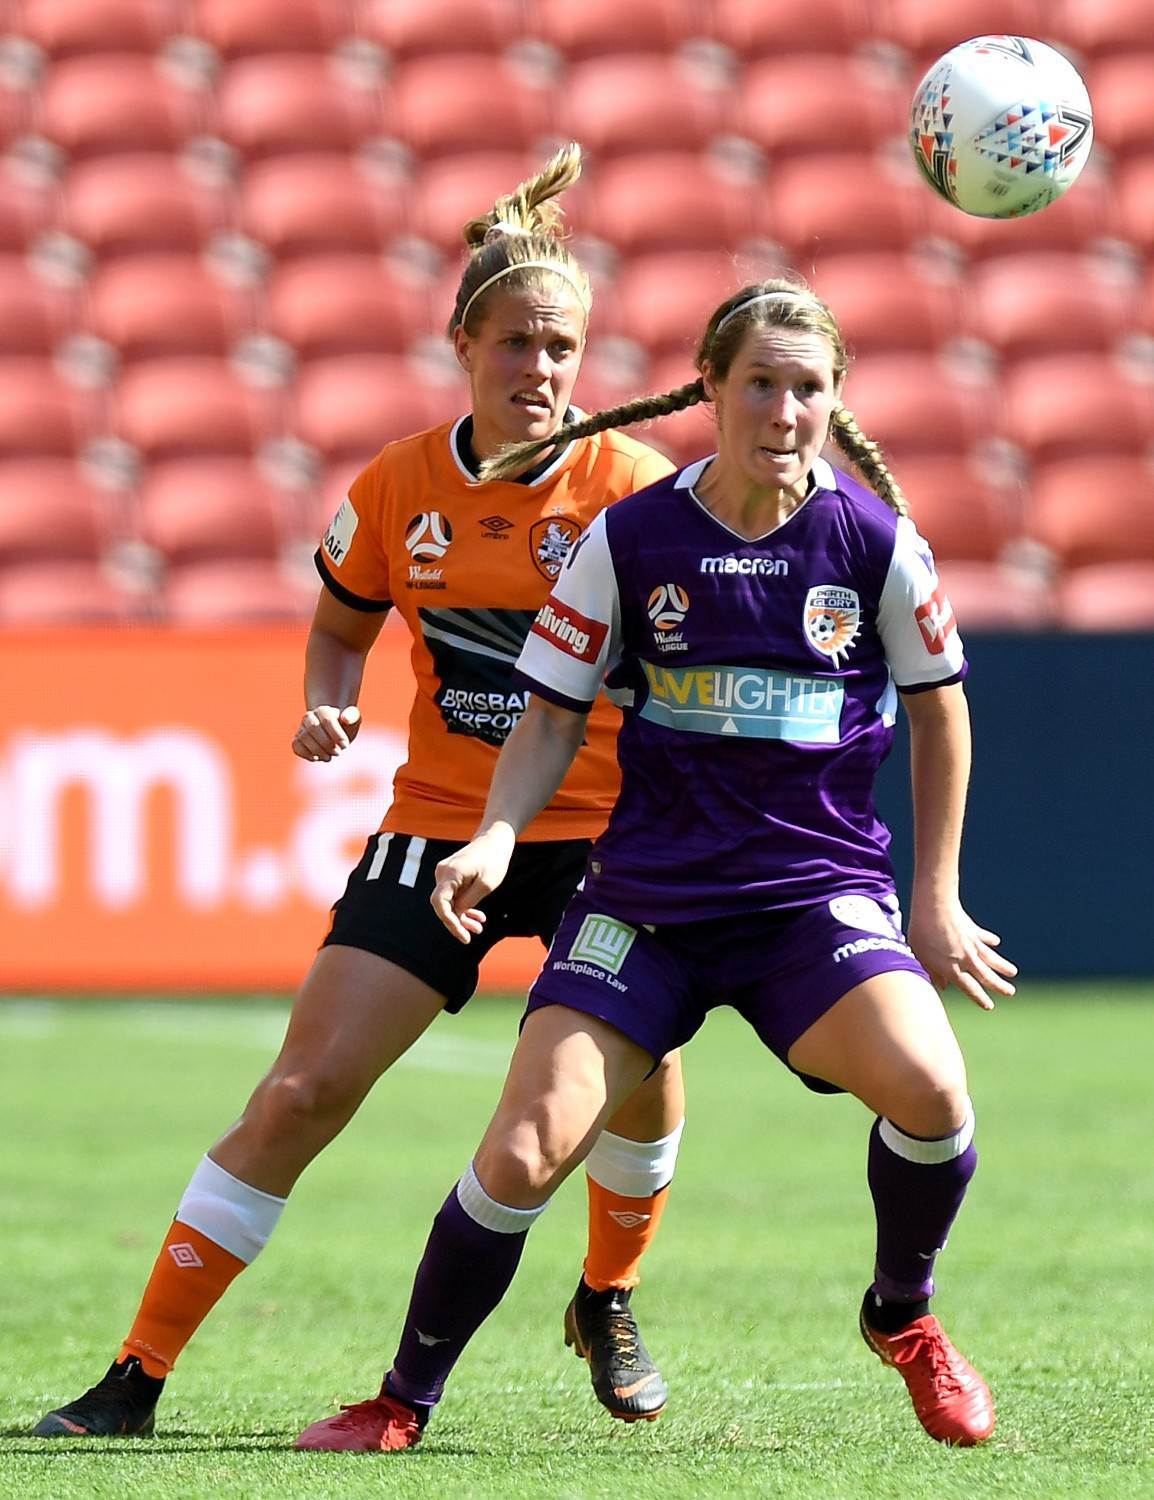 W-League / Fox Sports to deliver unprecedented coverage of Women's ... - Detailed info include goals scored, top scorers, over 2.5, fts, btts, corners, clean sheets.